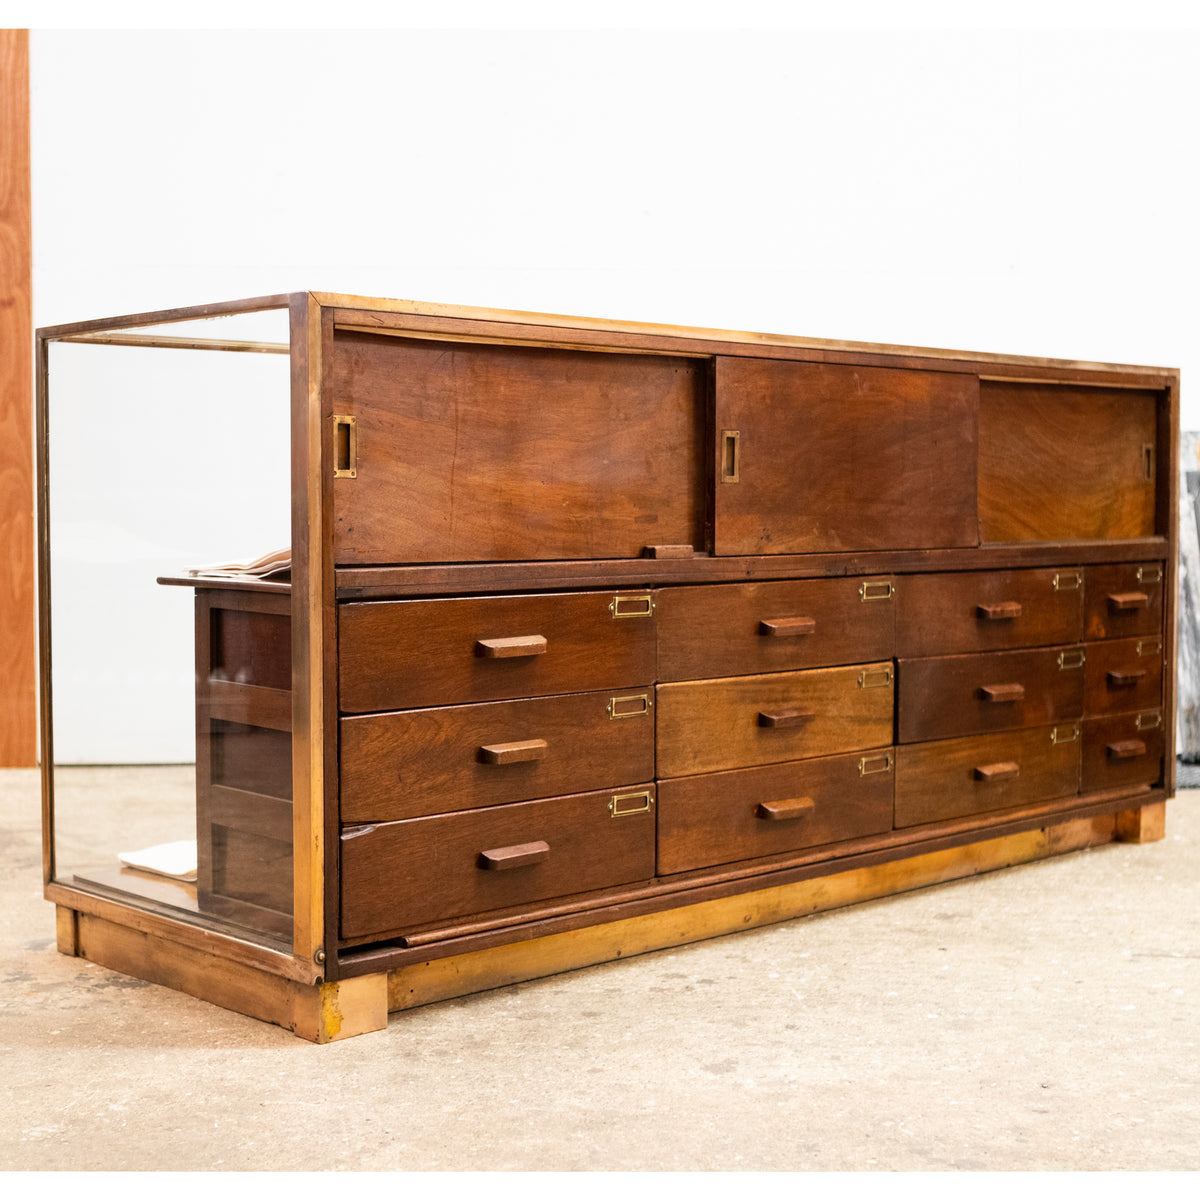 Art Deco Mahogany Shop Counter with Drawers | The Architectural Forum